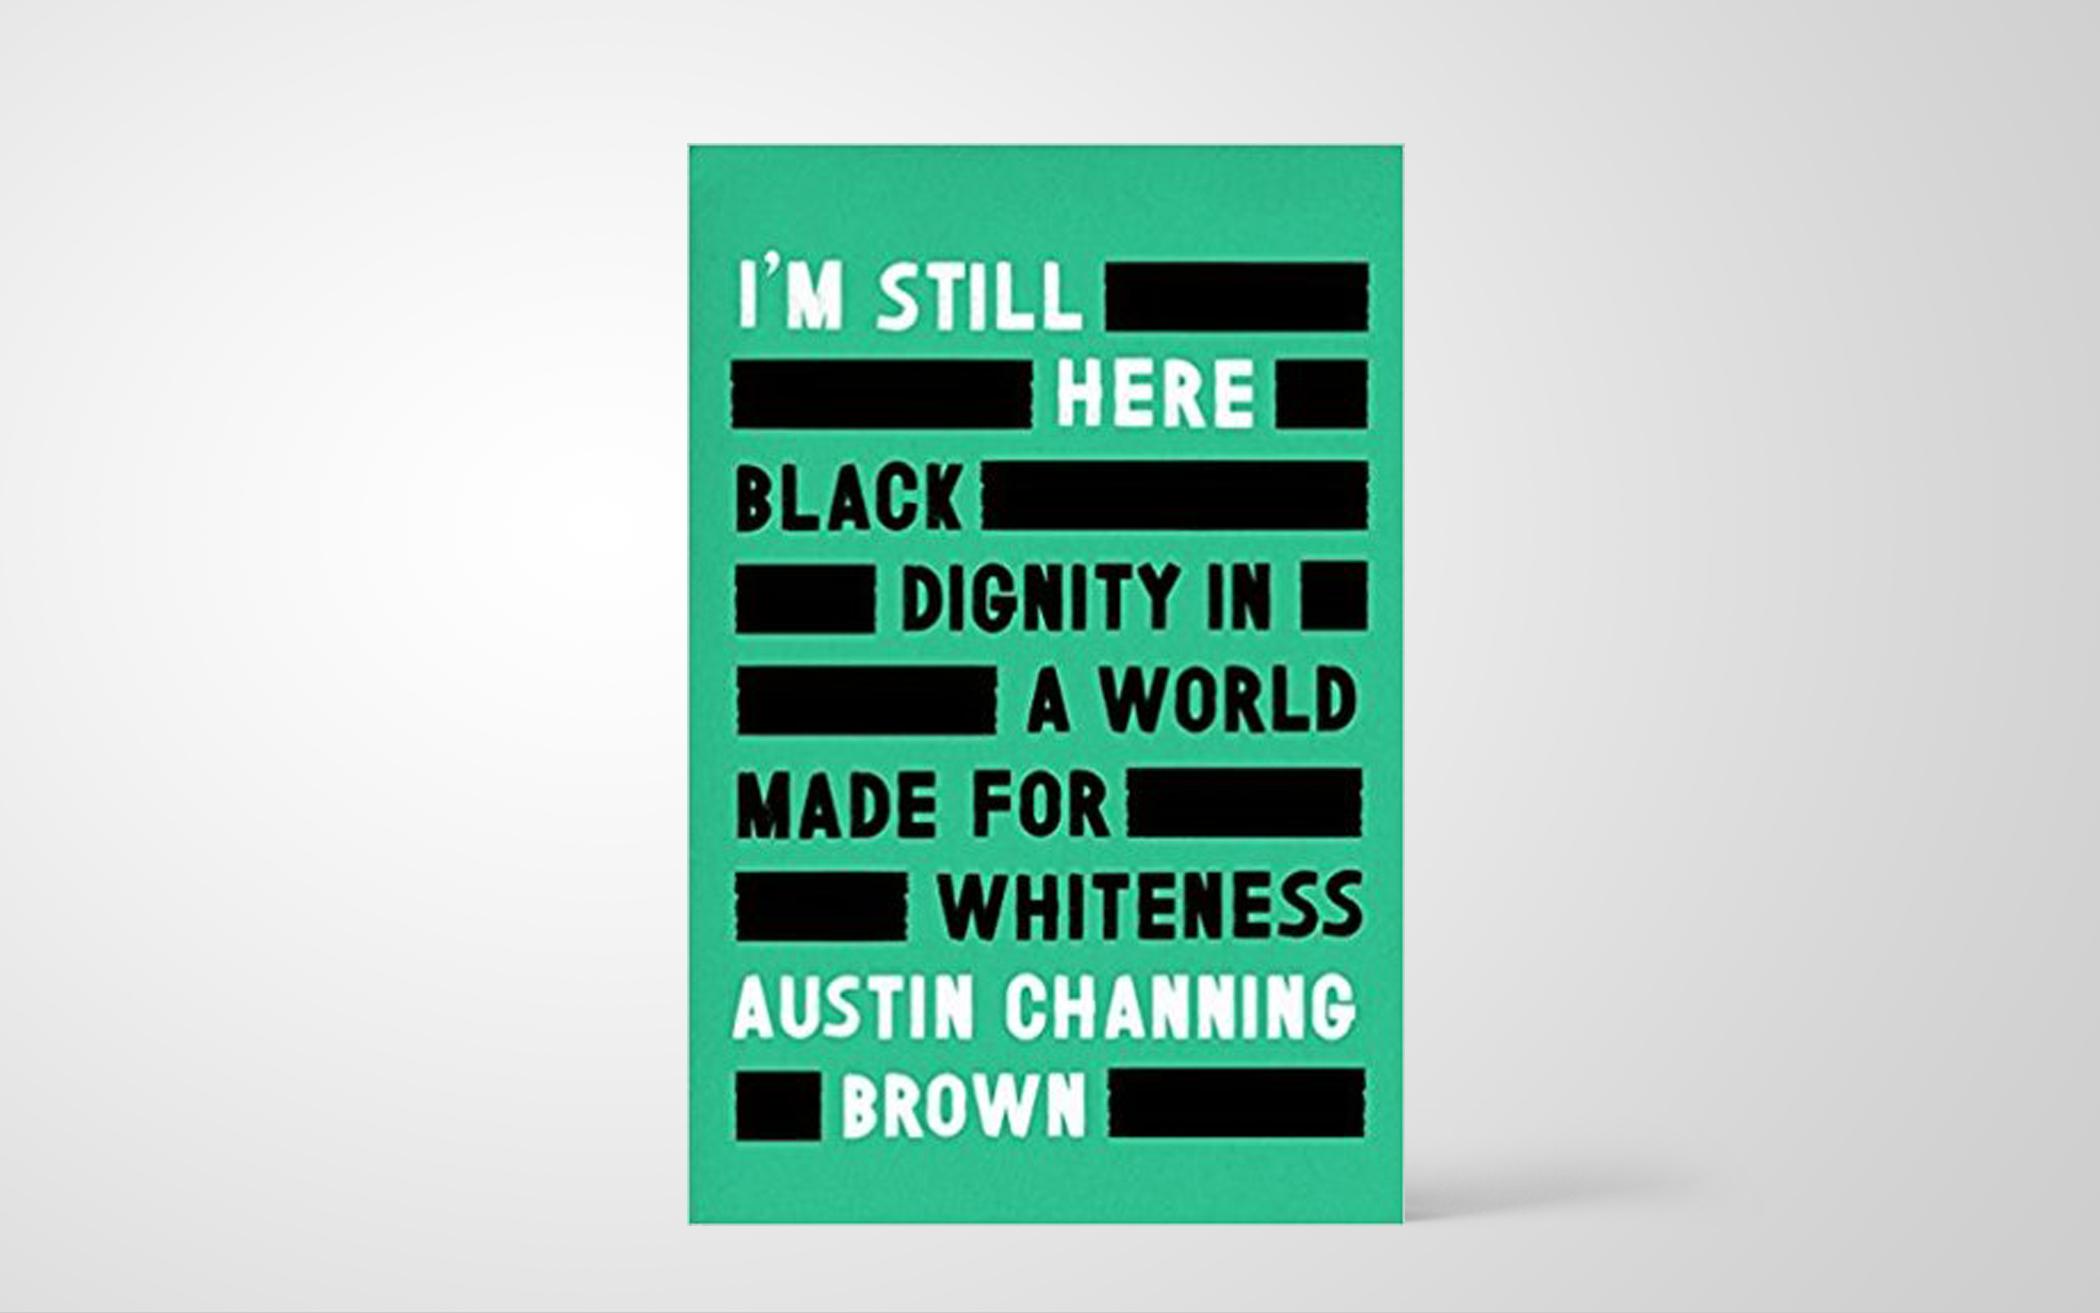 I’m Still Here: Black Dignity in a World Made for Whiteness